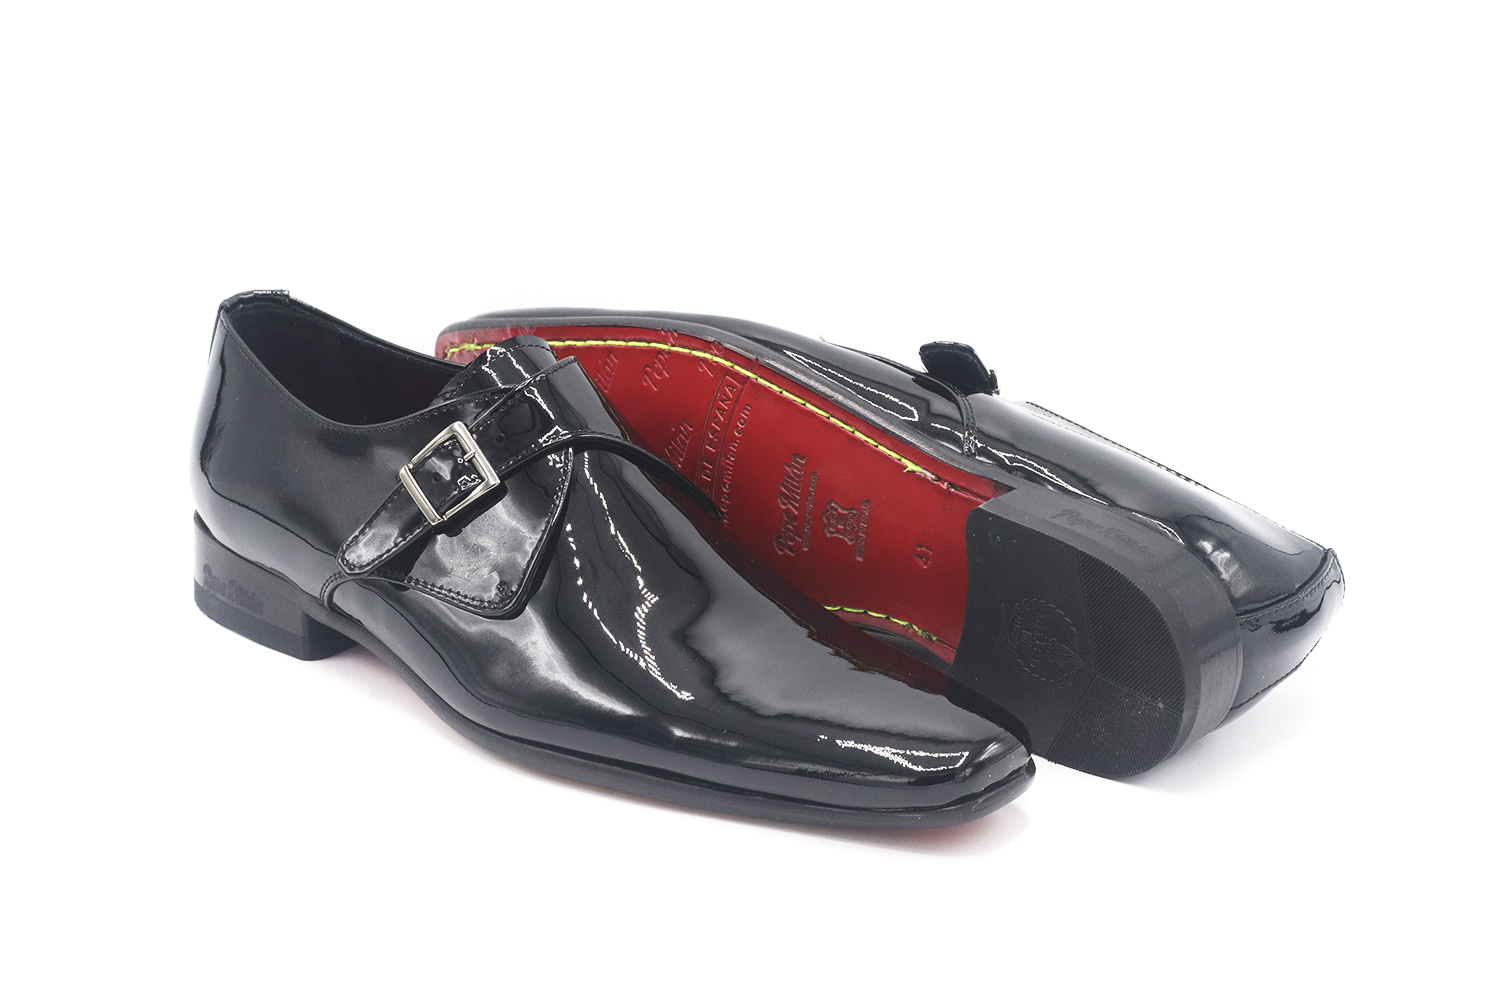 Patent leather shoe, designed in Travis patent leather,